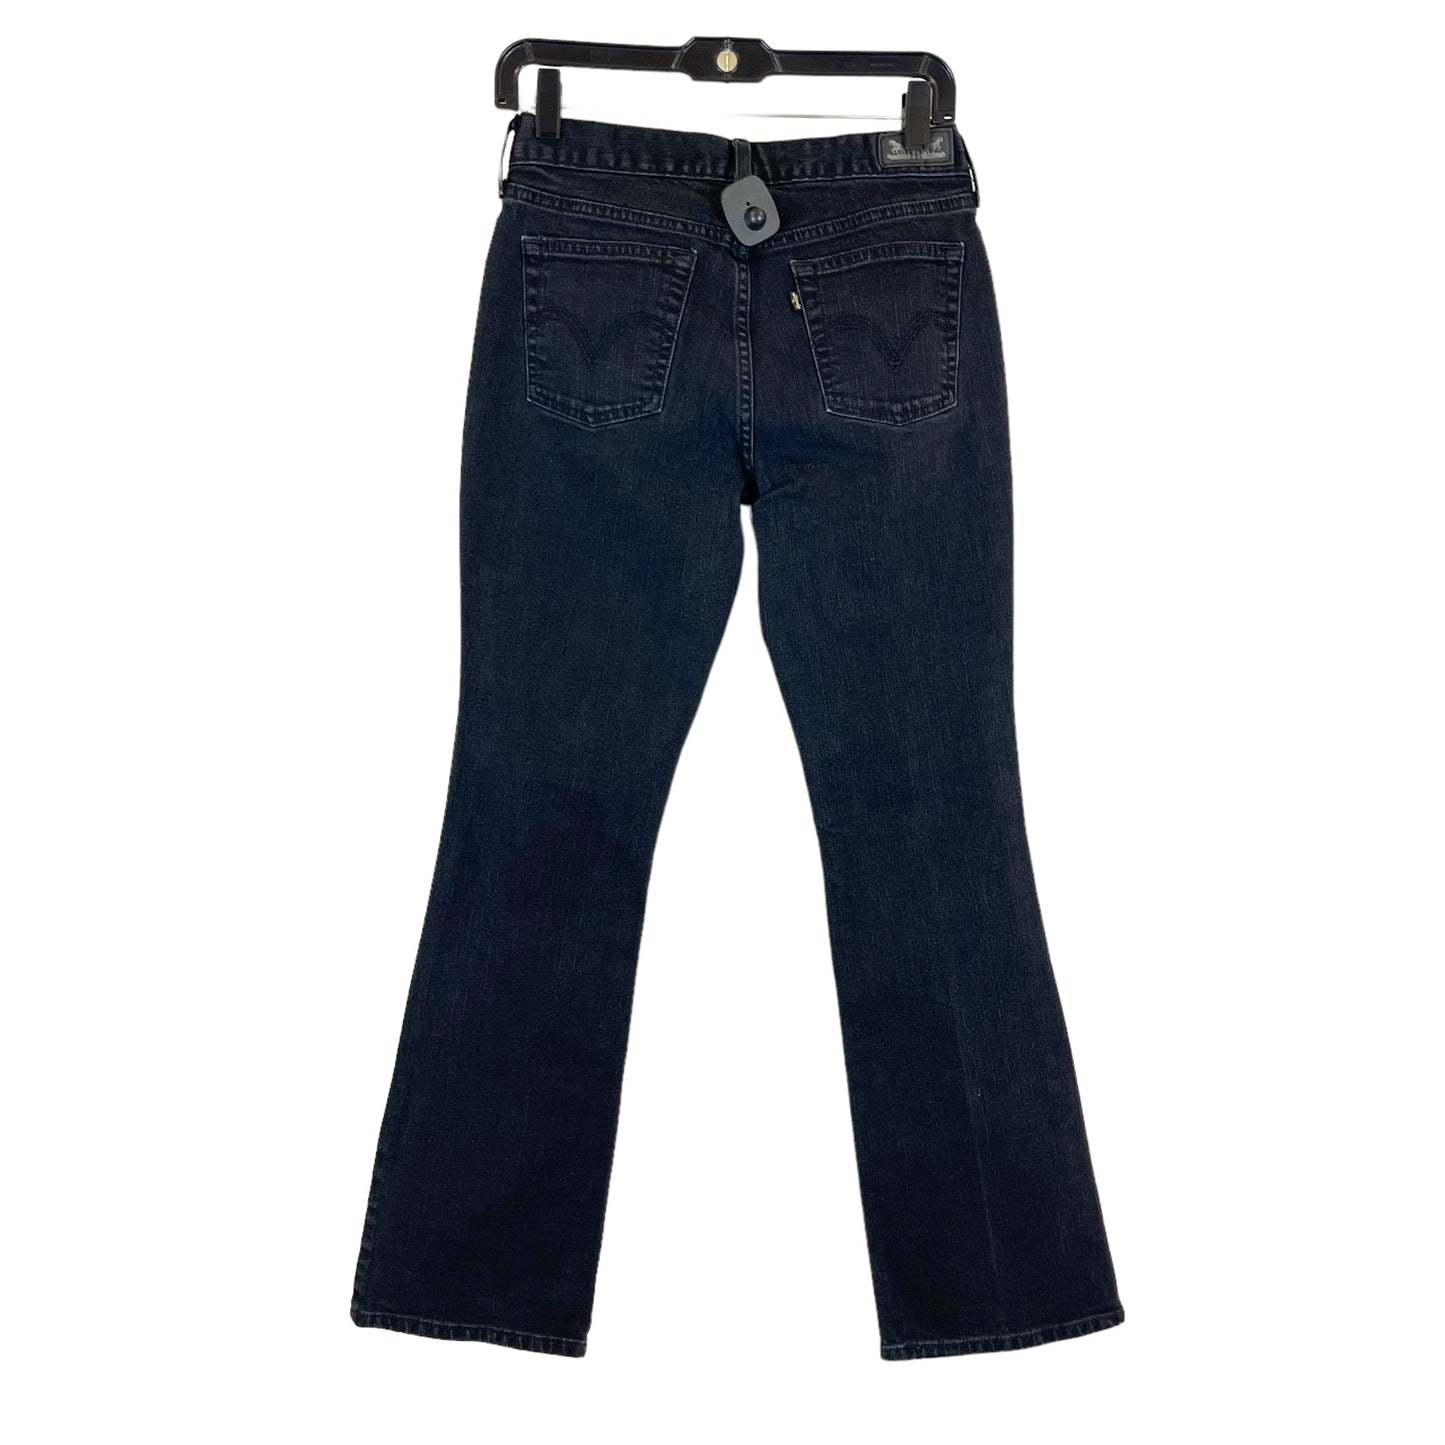 Jeans Flared By Levis  Size: 4